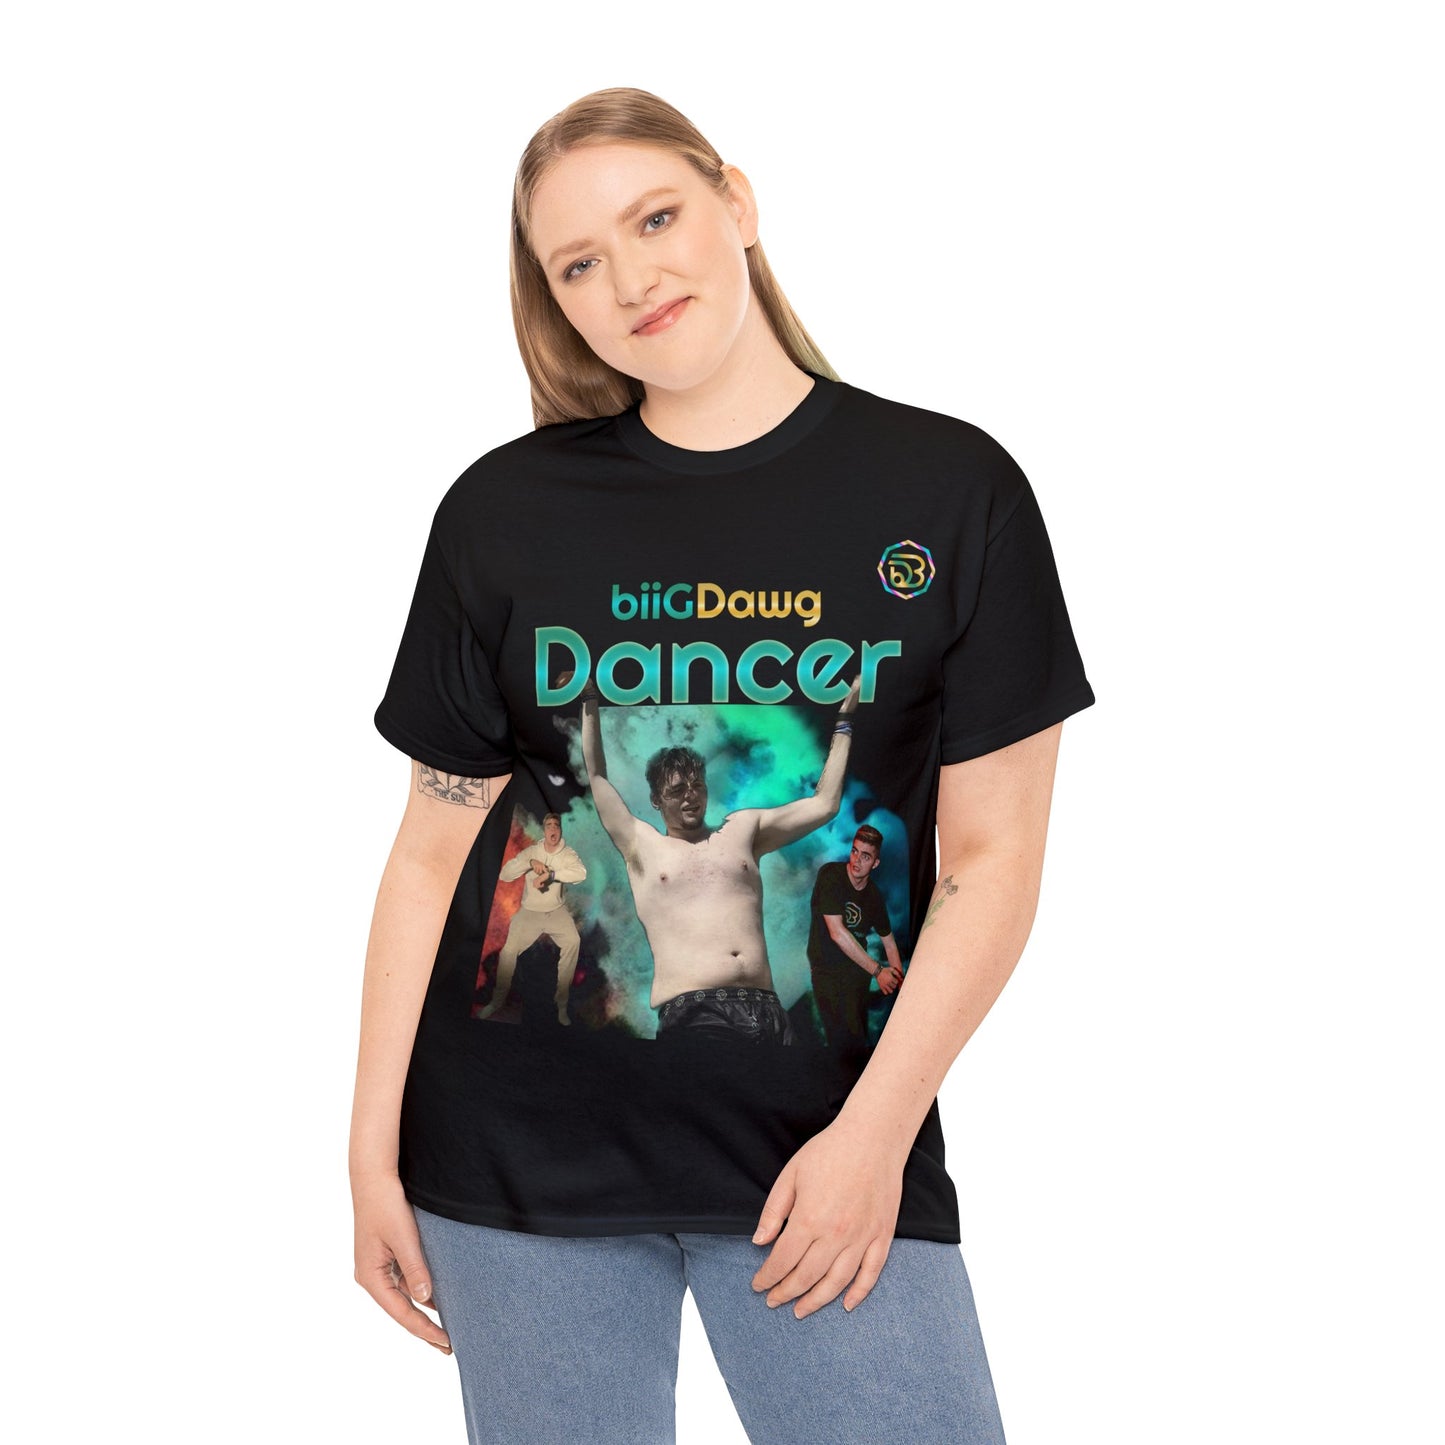 First Exclusive biiGDawgDancer T-Shirt